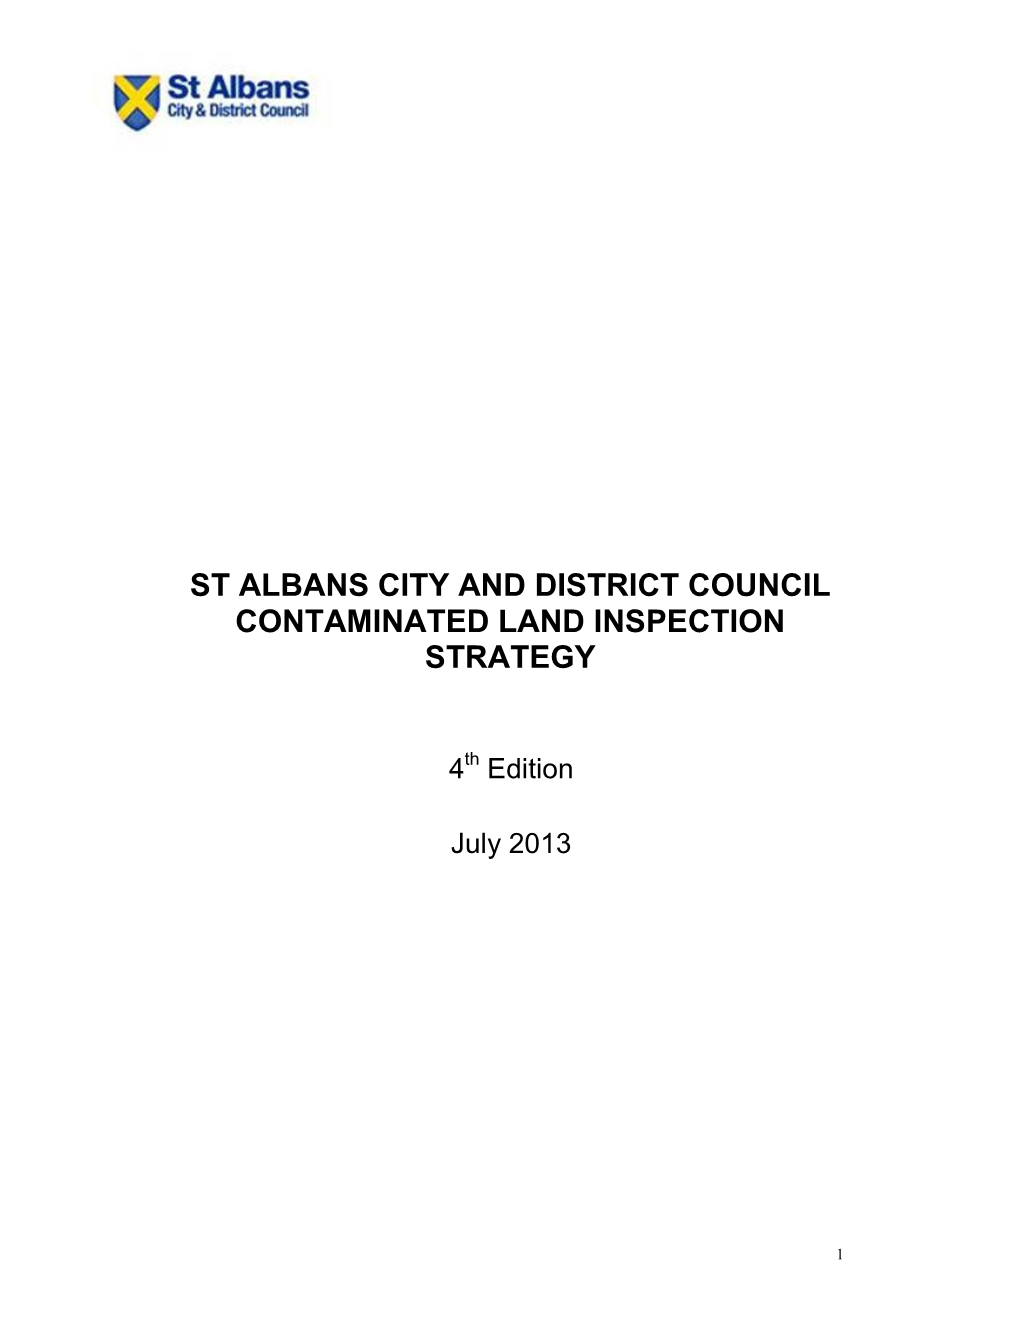 St Albans City and District Council Contaminated Land Inspection Strategy